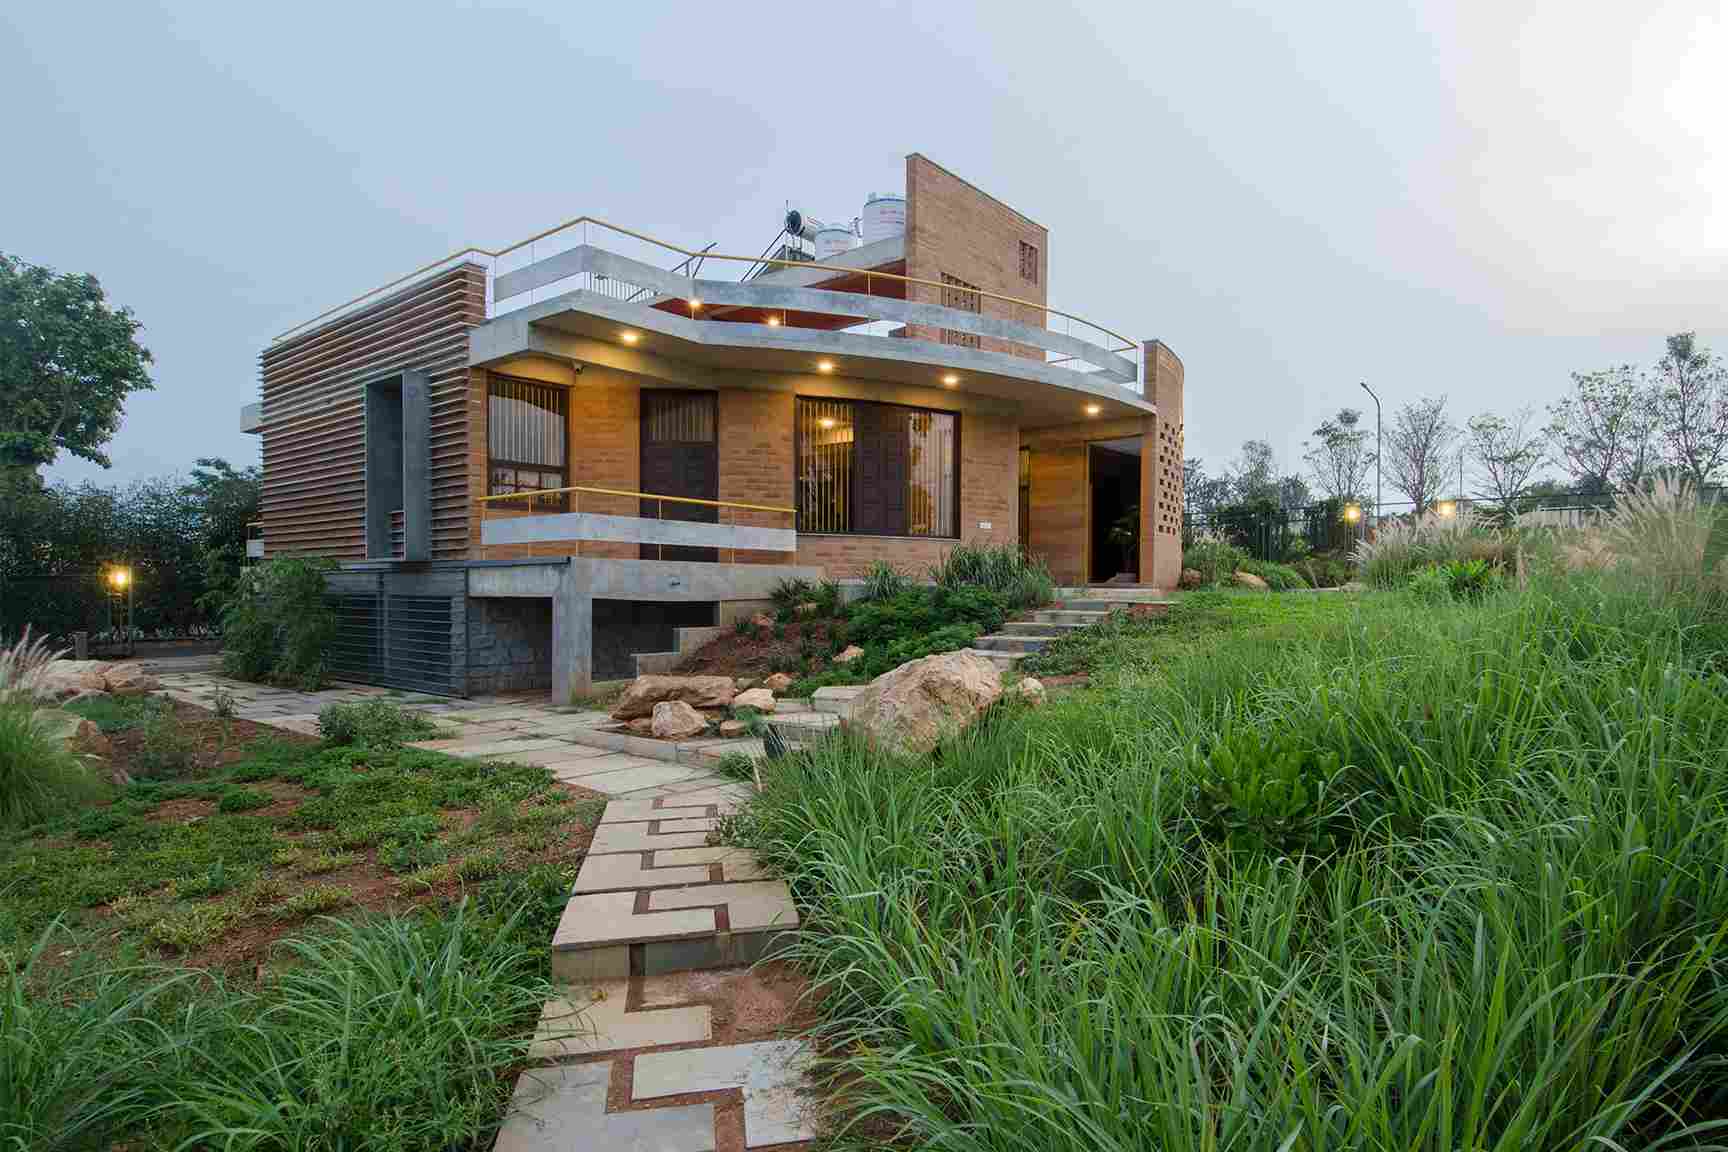 'Breathe' is a sustainable home in Bengaluru that has modern architecture infused with ecofriendly design